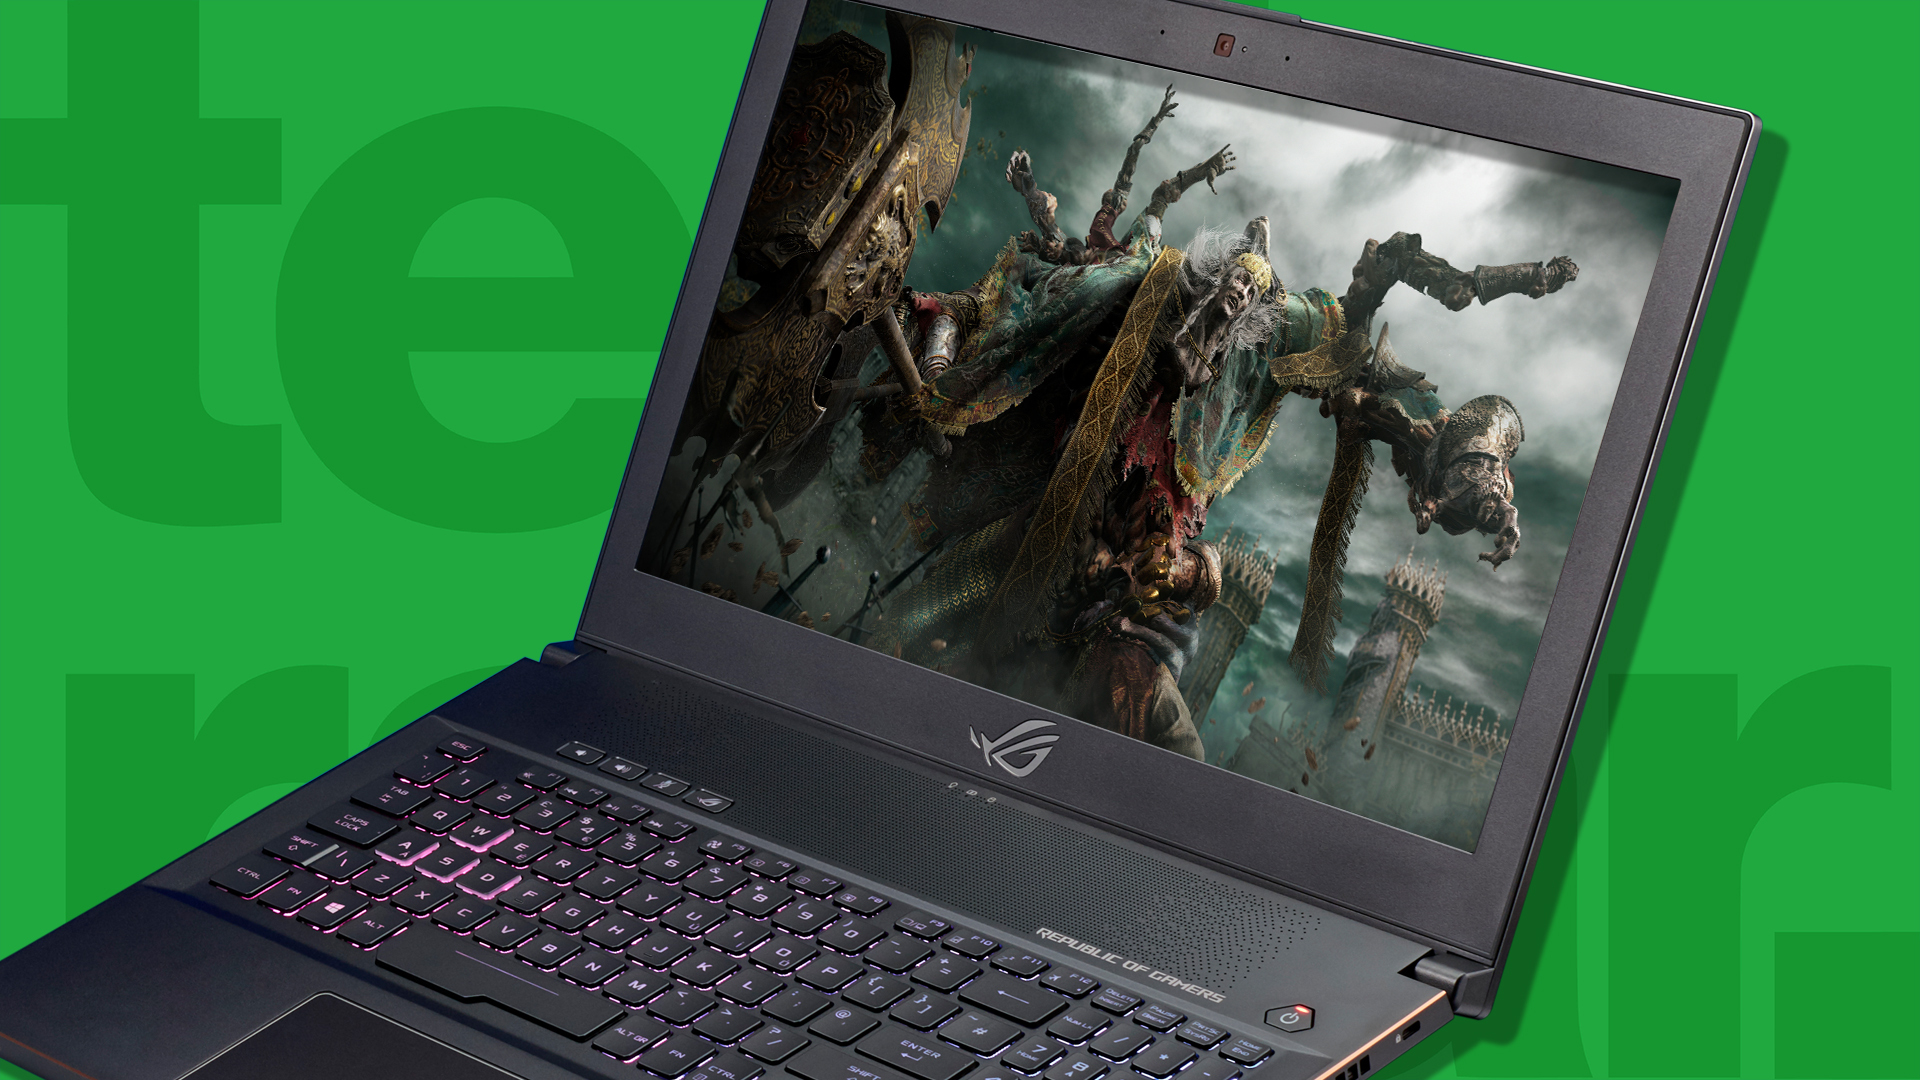 Elden Ring playing on a Asus ROG gaming laptop against a green background